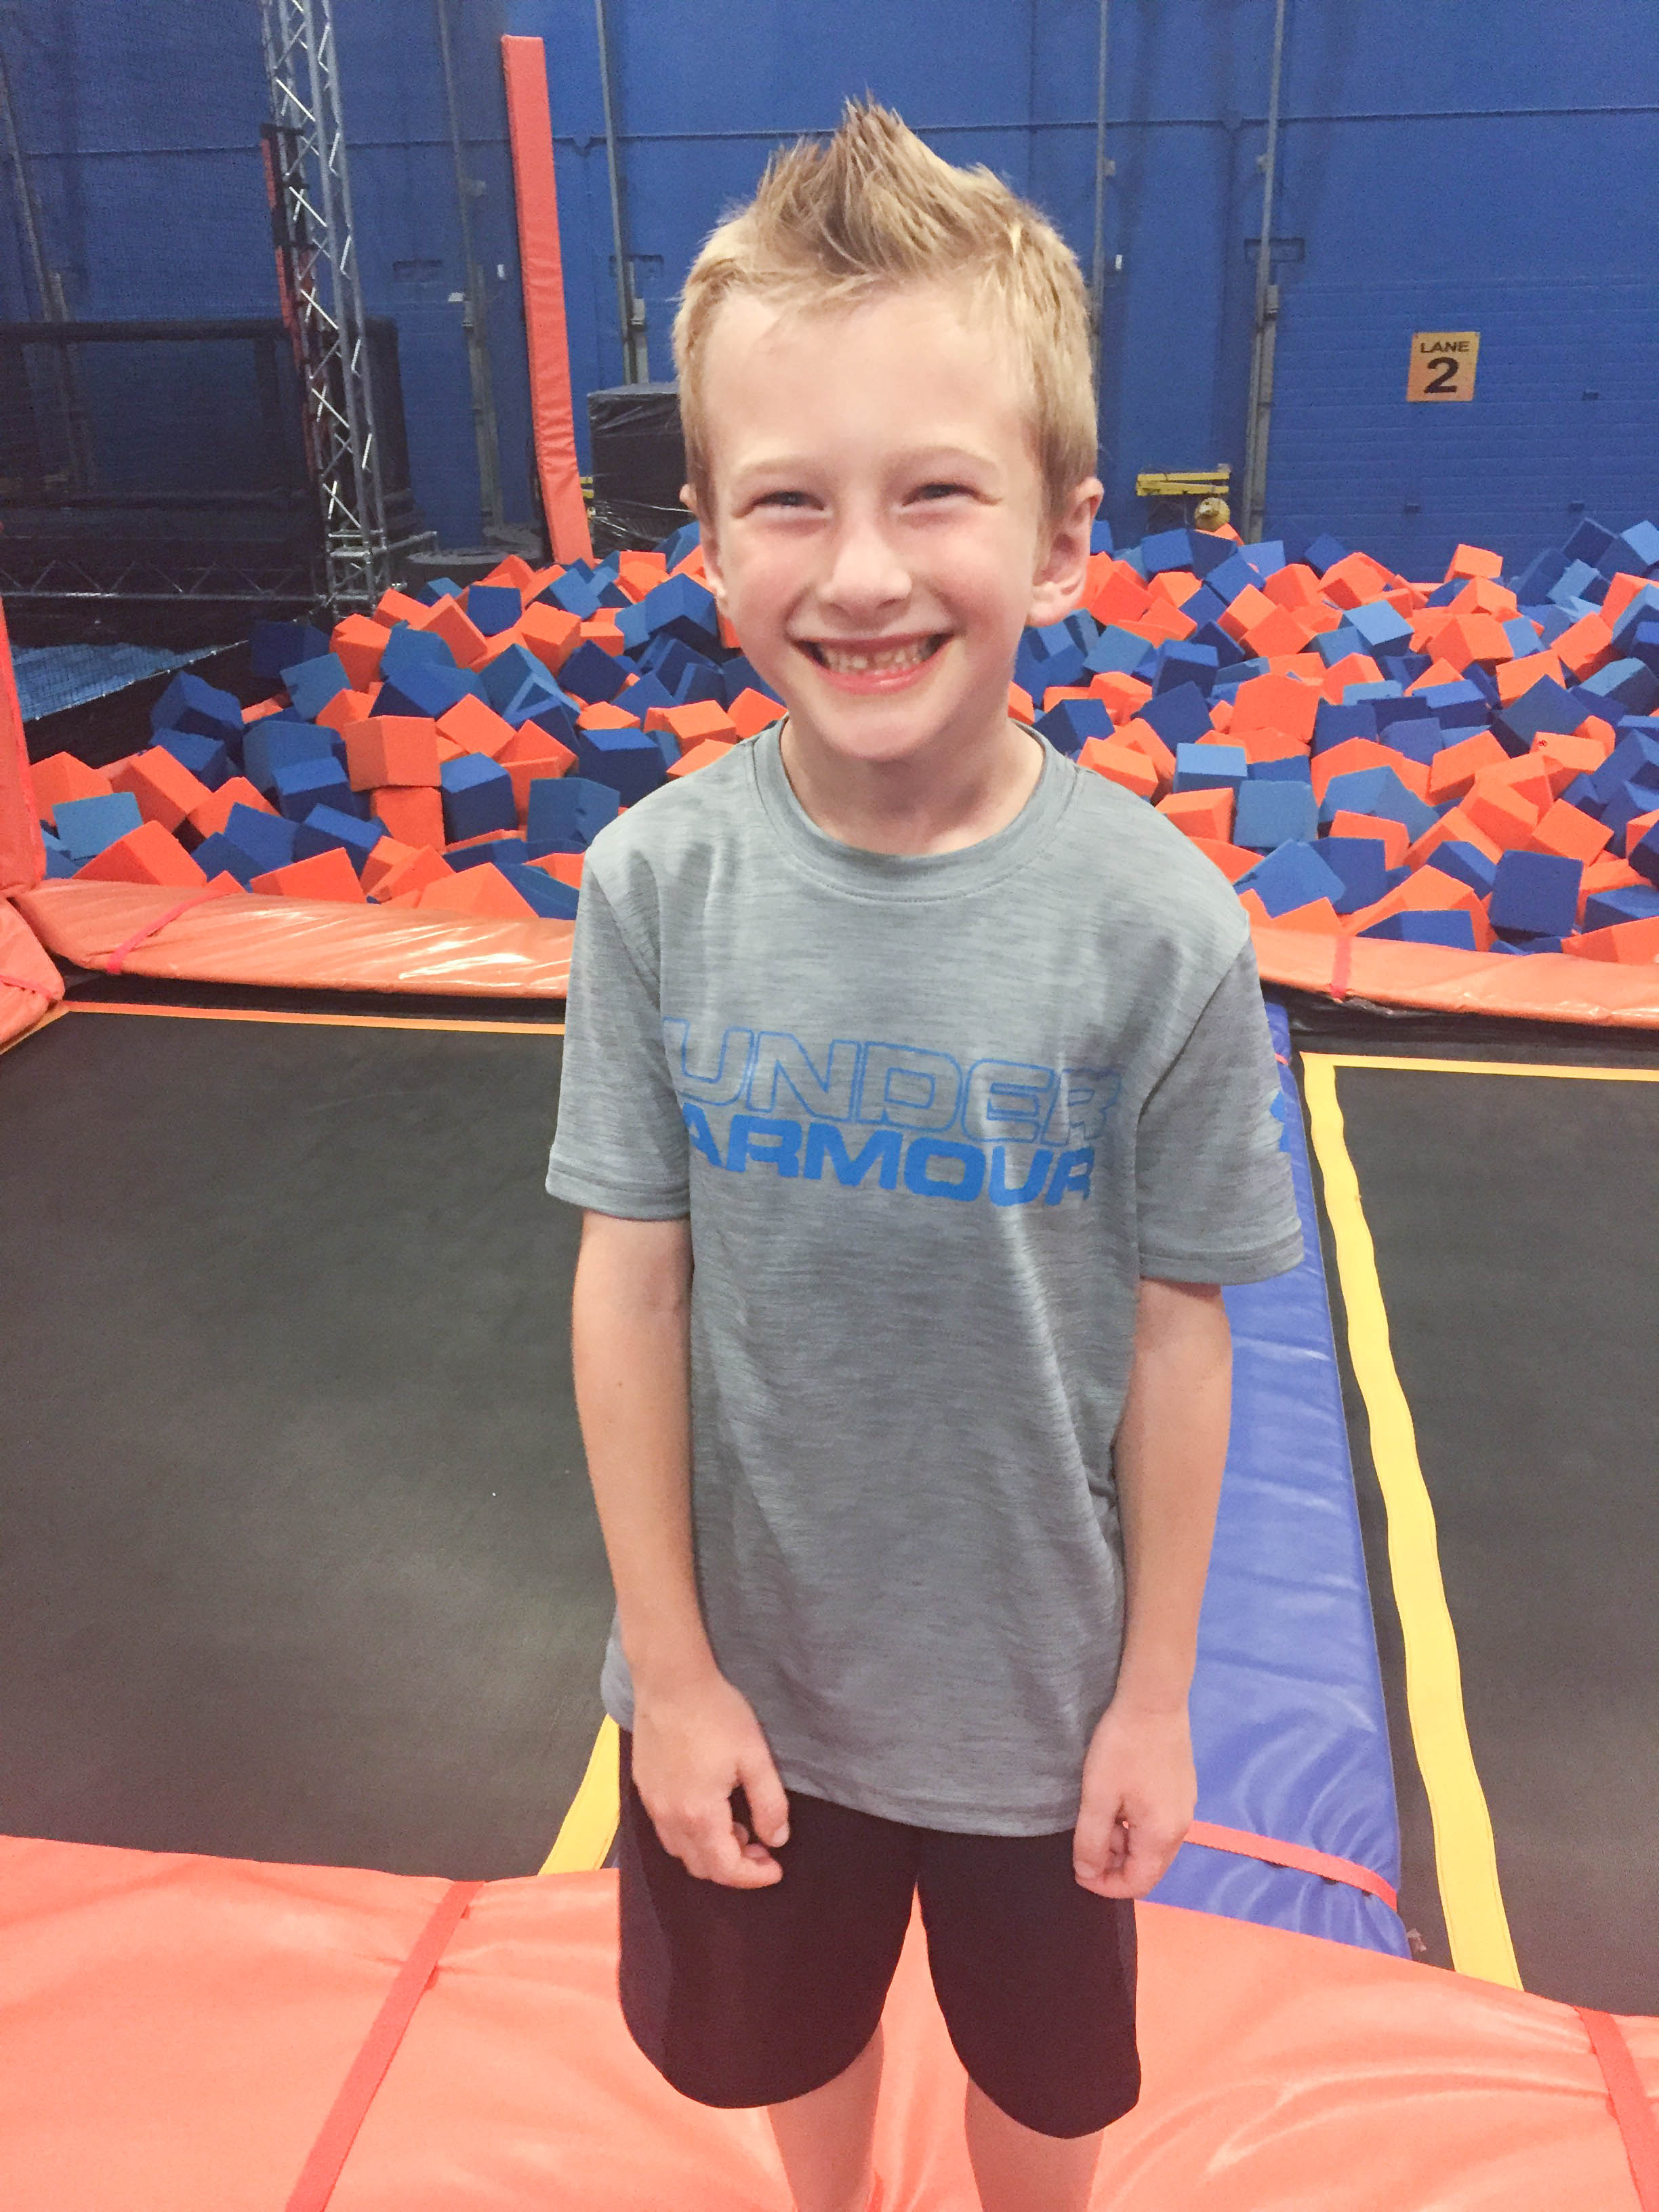 Jumping into a fun-filled birthday at Sky Zone!